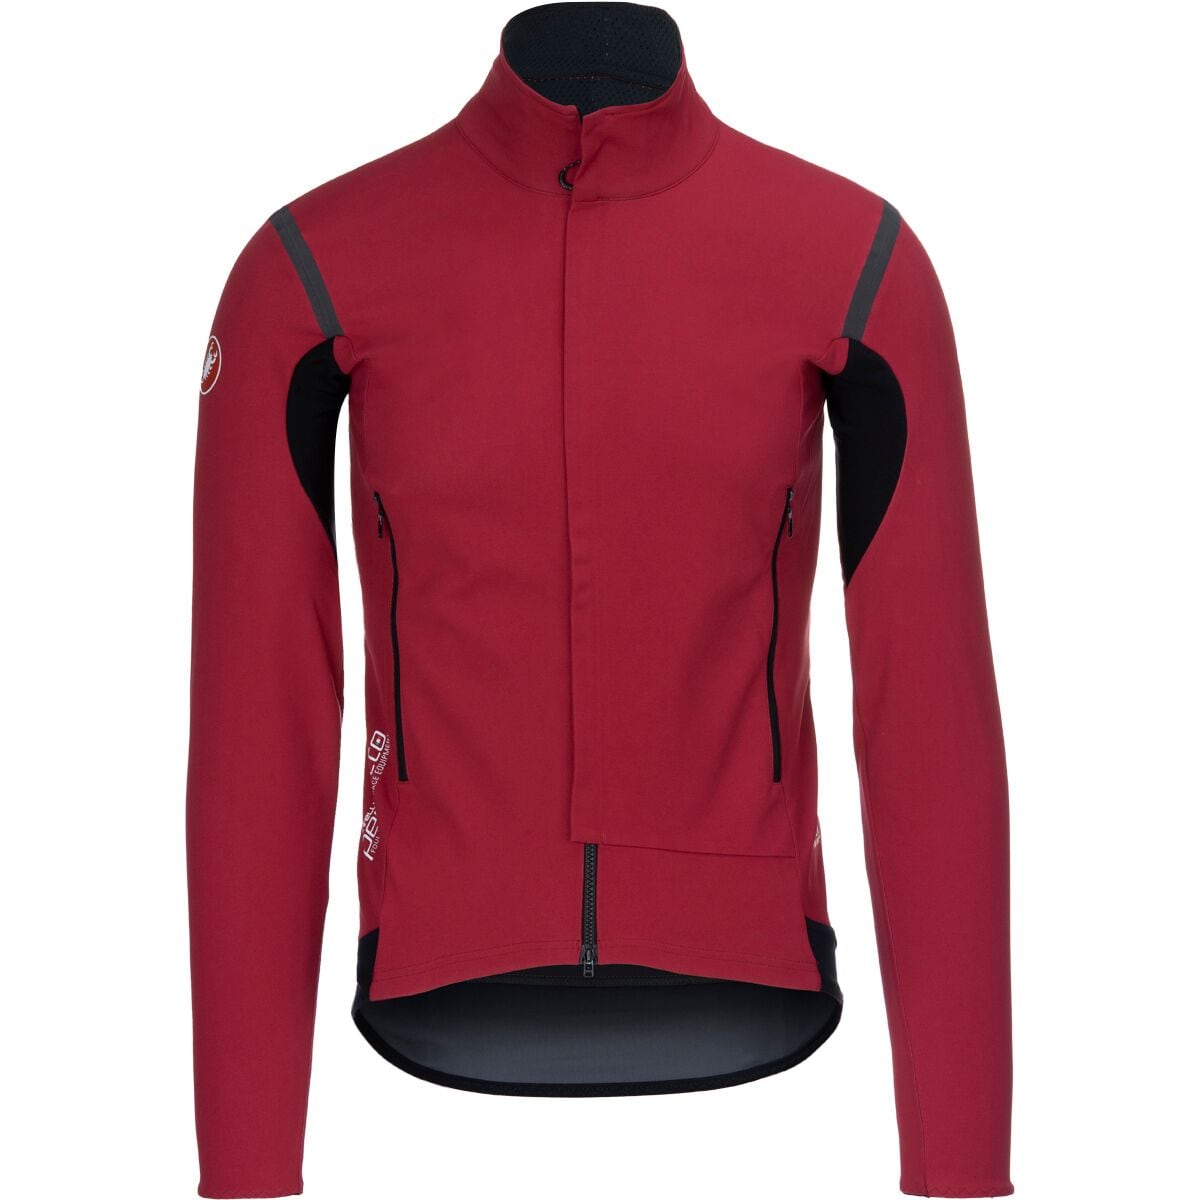 Castelli Perfetto RoS 2 Limited Edition Jacket - Men's